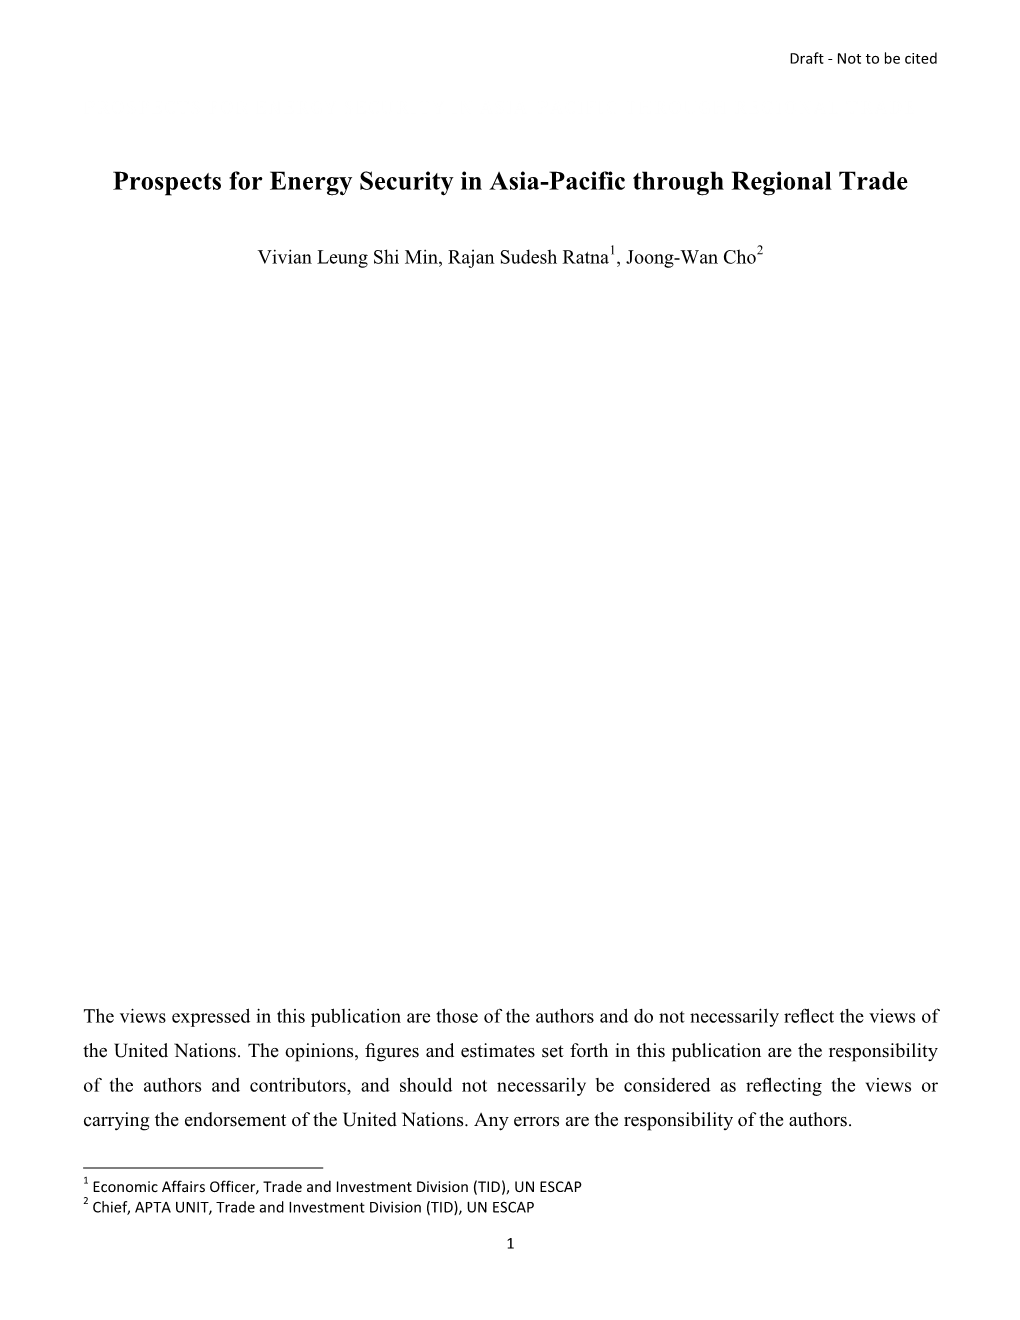 Prospects for Energy Security in Asia-Pacific Through Regional Trade